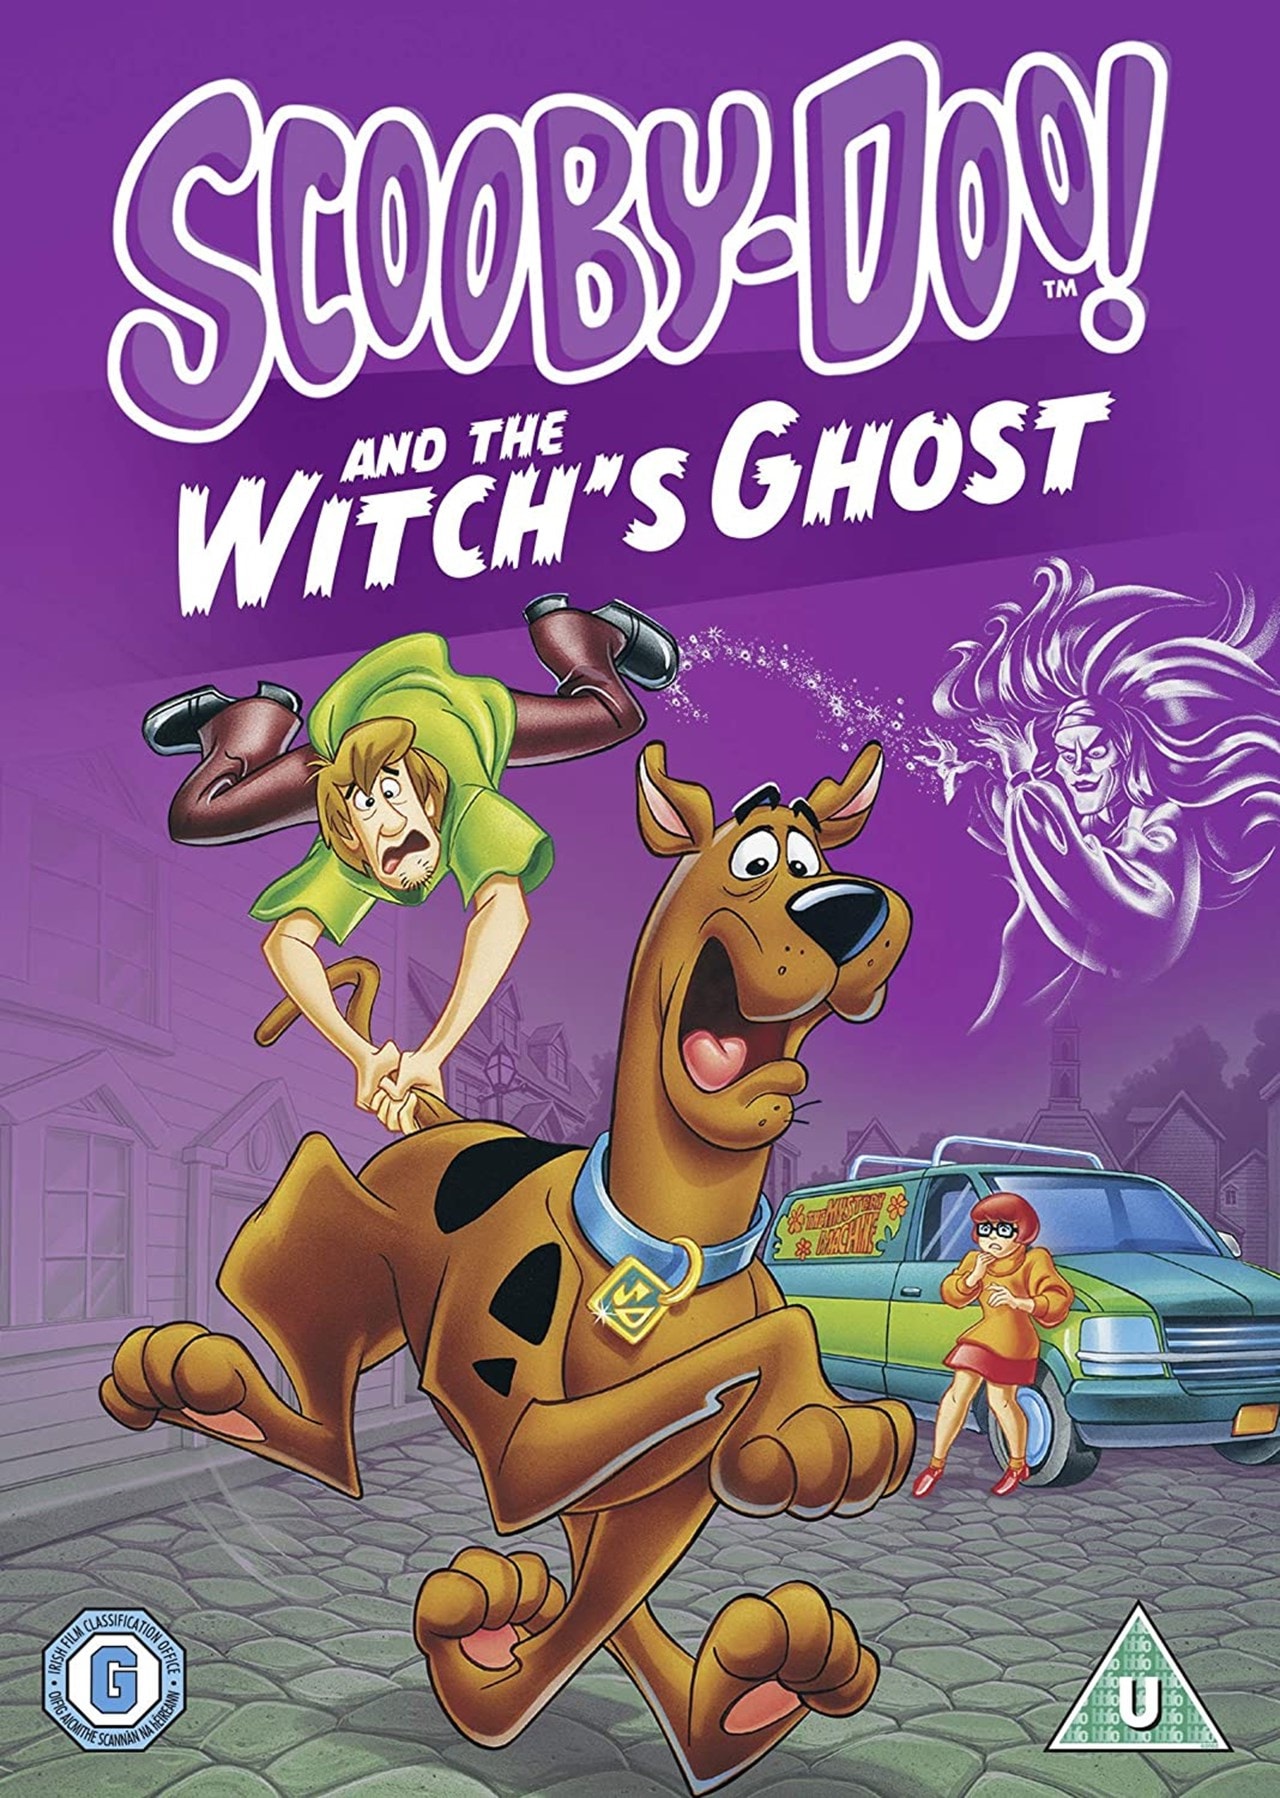  Scooby  Doo  Scooby  Doo  and the Witch s Ghost DVD  Free 